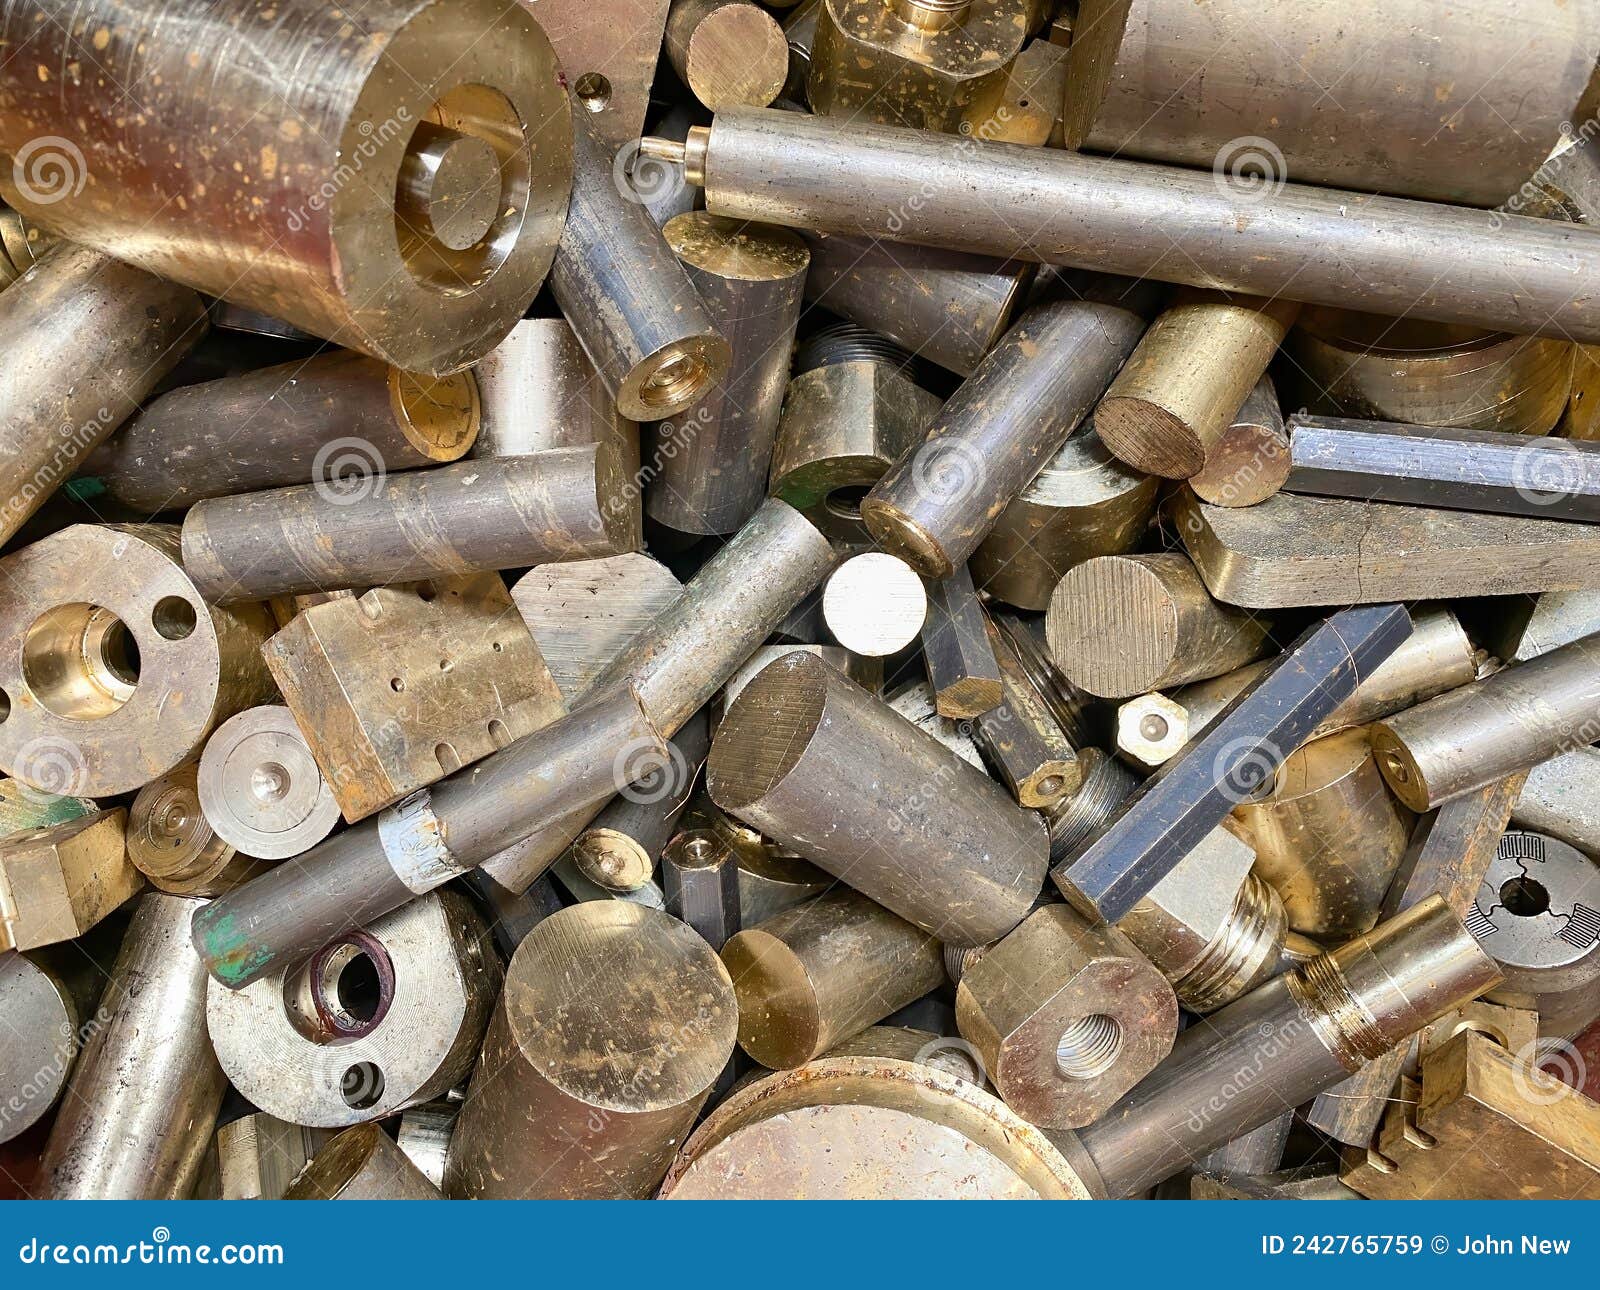 https://thumbs.dreamstime.com/z/metal-products-factory-scrap-brass-rods-rejects-high-quality-photo-242765759.jpg